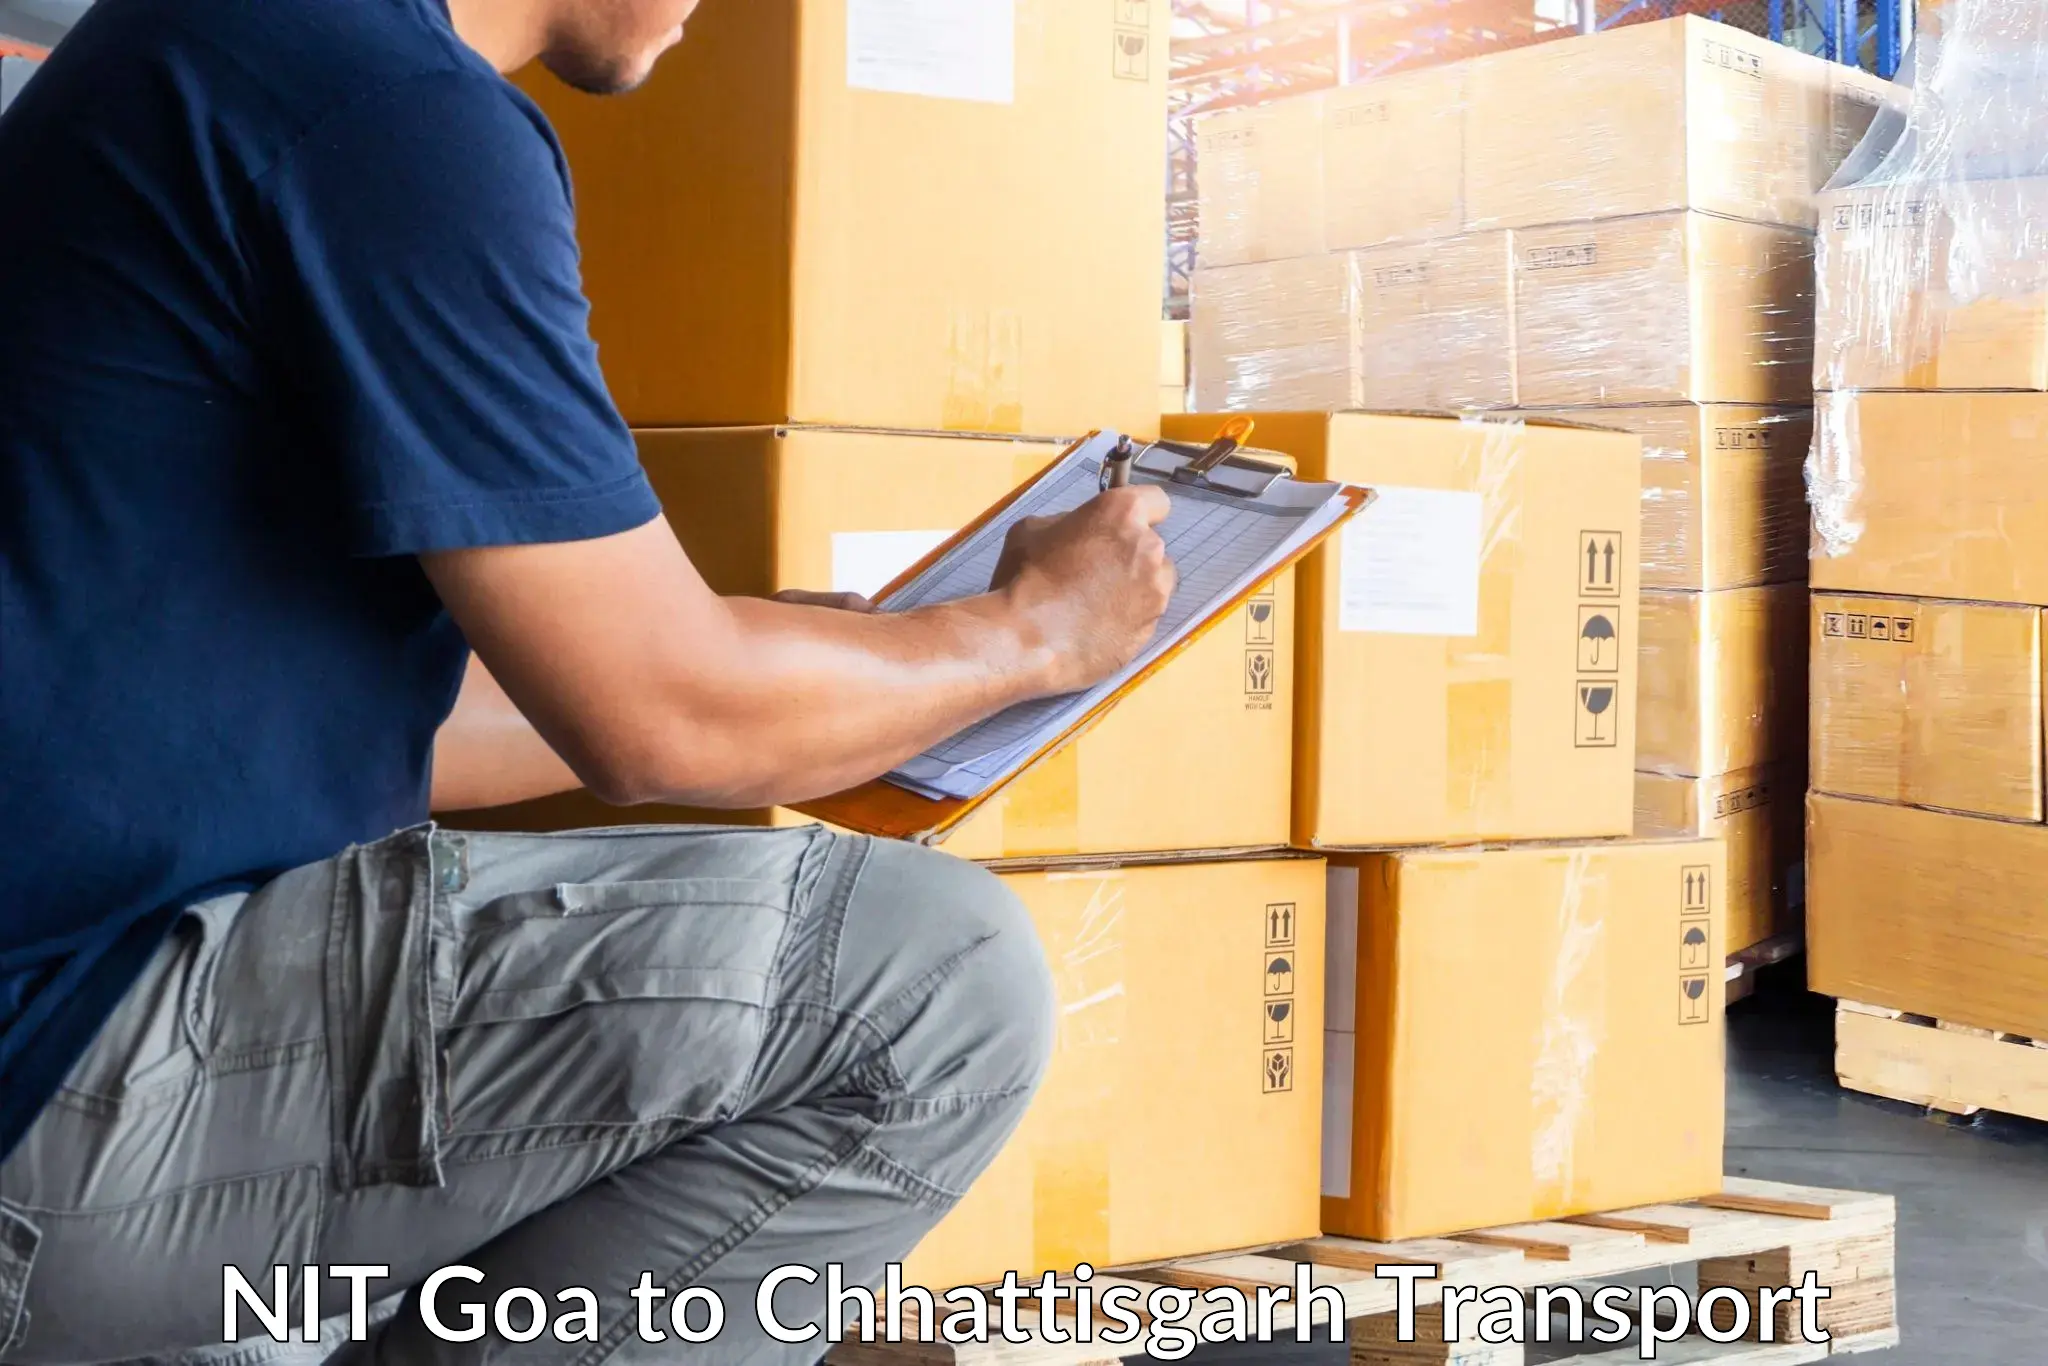 Parcel transport services in NIT Goa to Raigarh